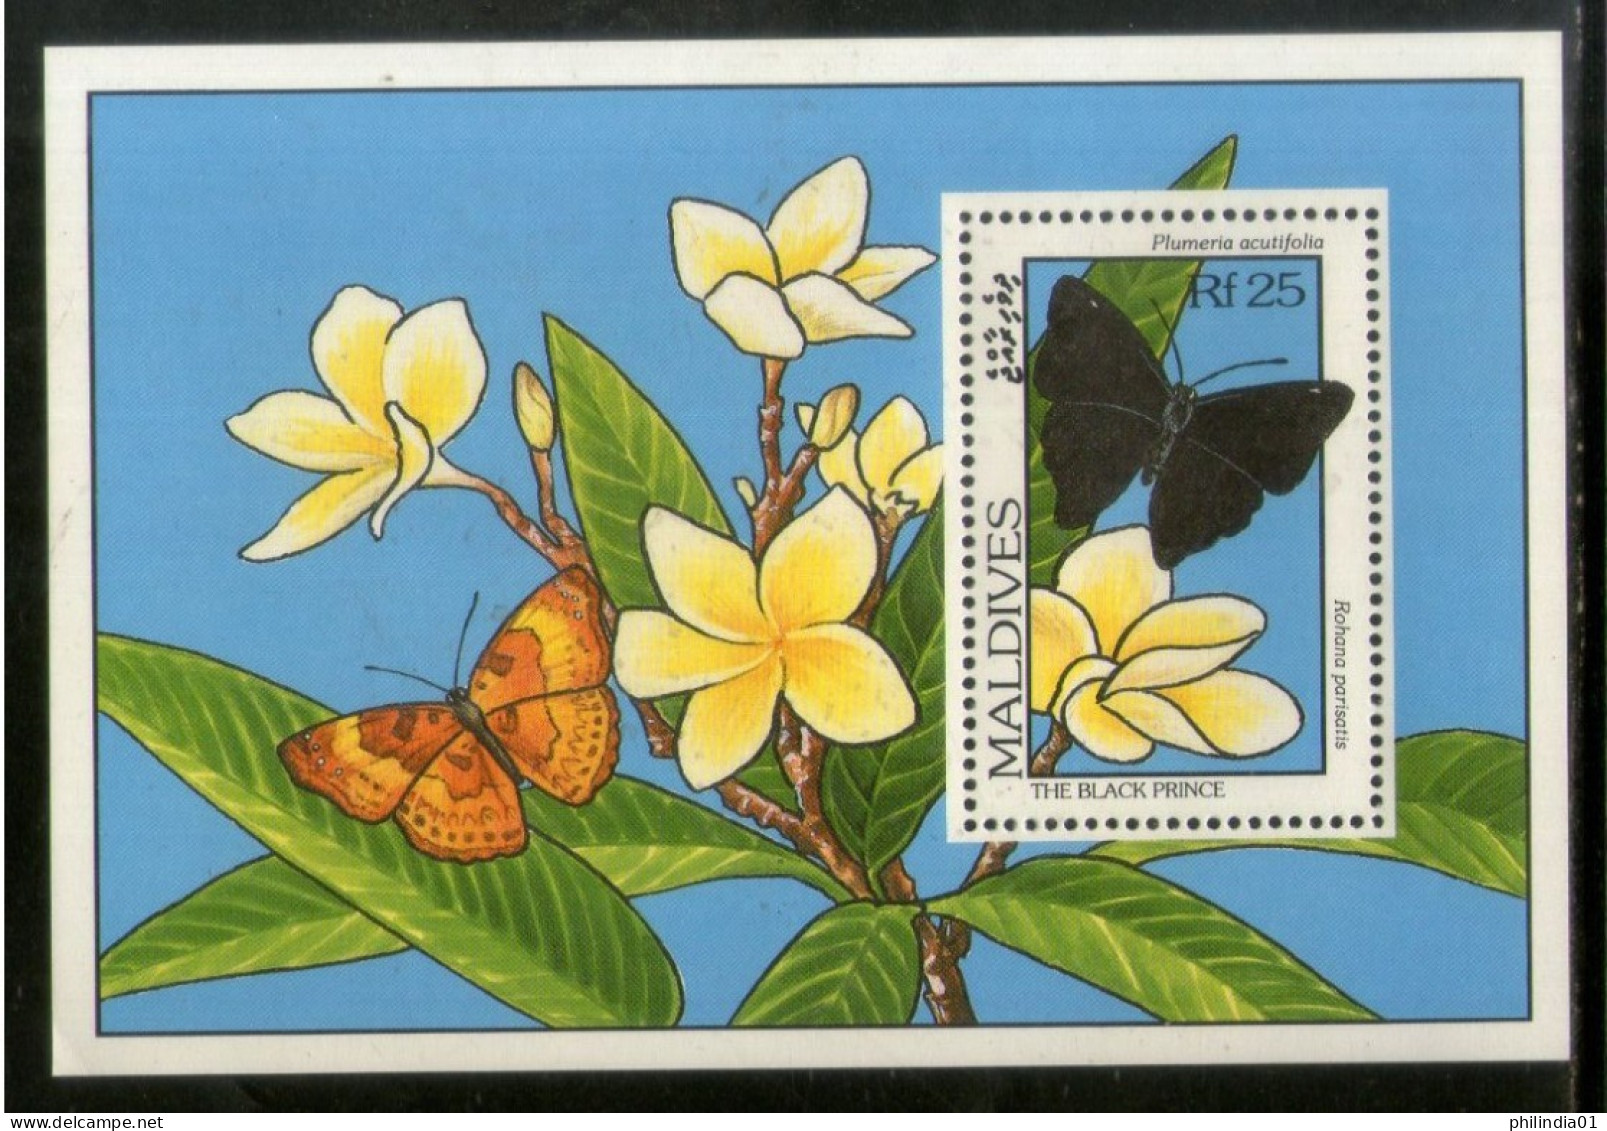 Maldives 1993 Black Prince Butterflies & Flowers Moth Insect Sc 1907 M/s MNH # 5293 - Farfalle